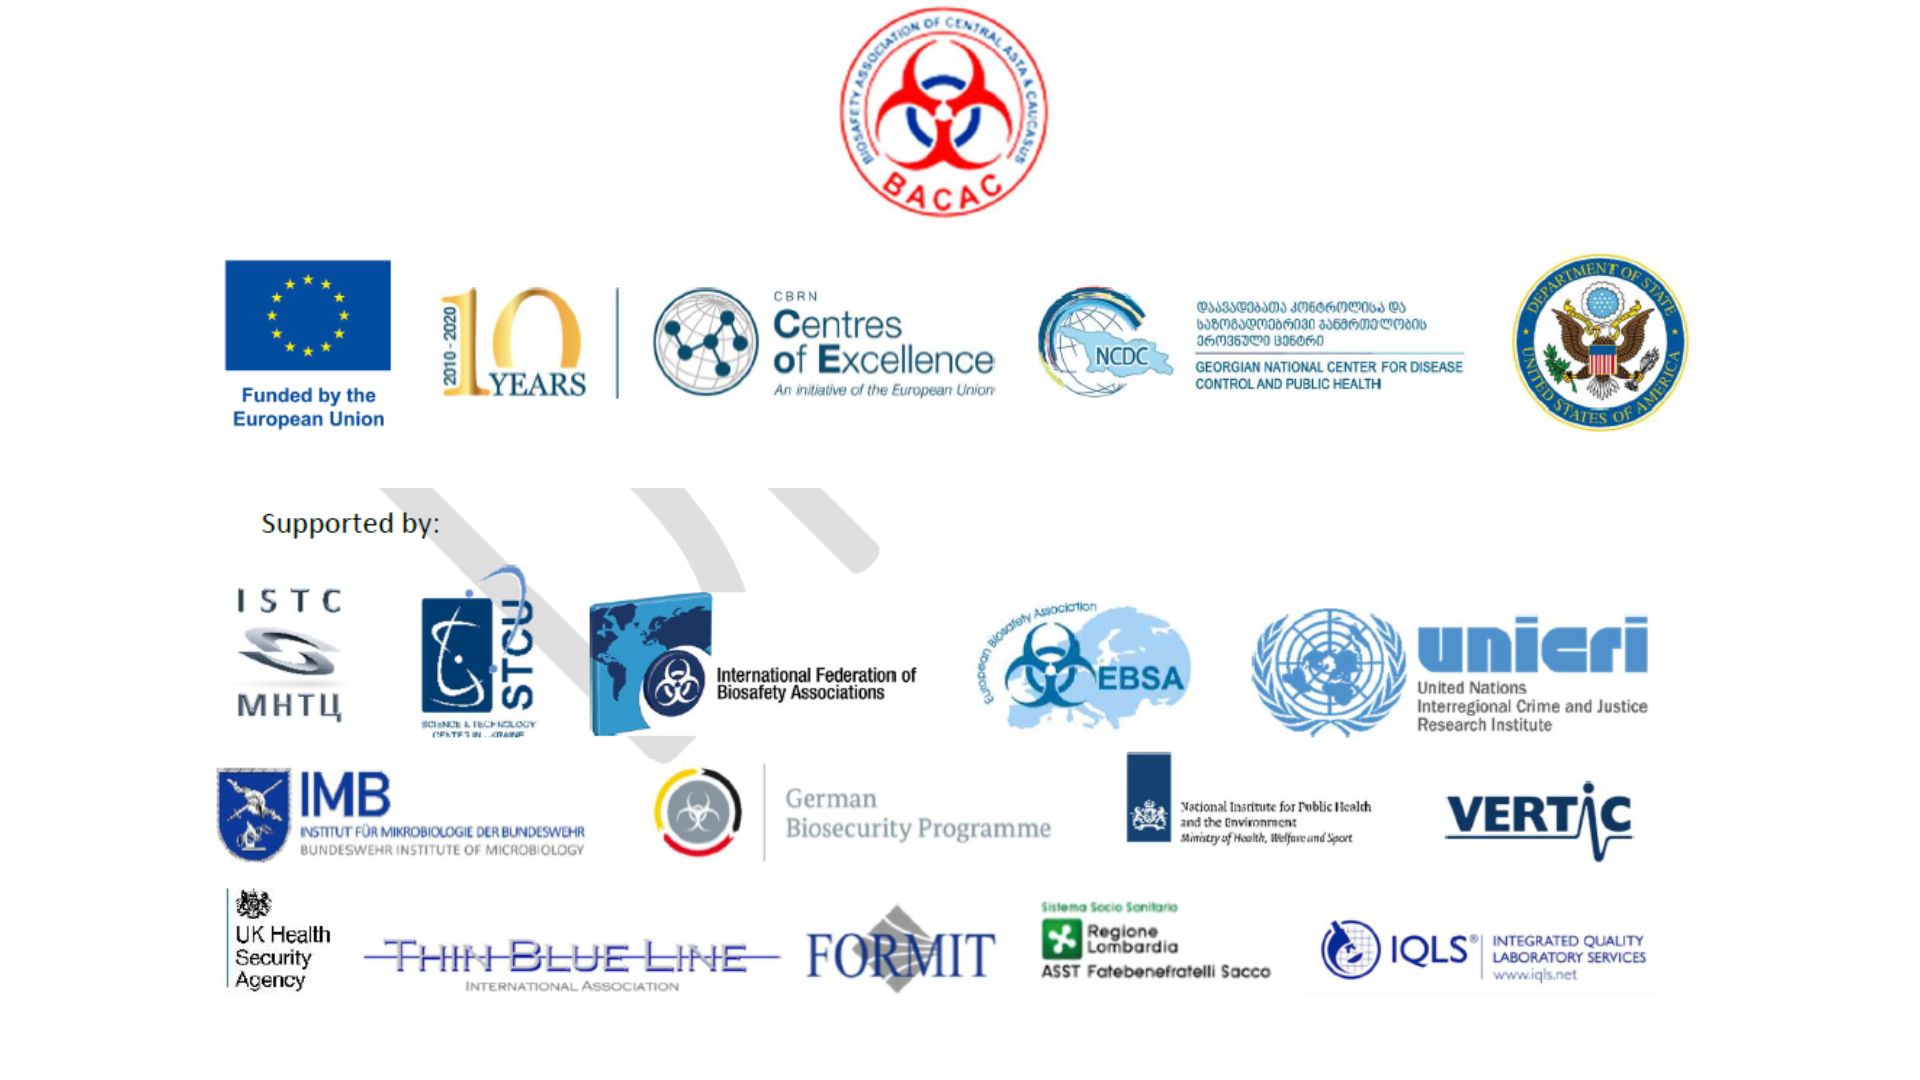 EU CBRN CoE – BACAC Conference On COVID19 Pandemic: Lessons Learned 3 -7 October, Tbilisi, Georgia